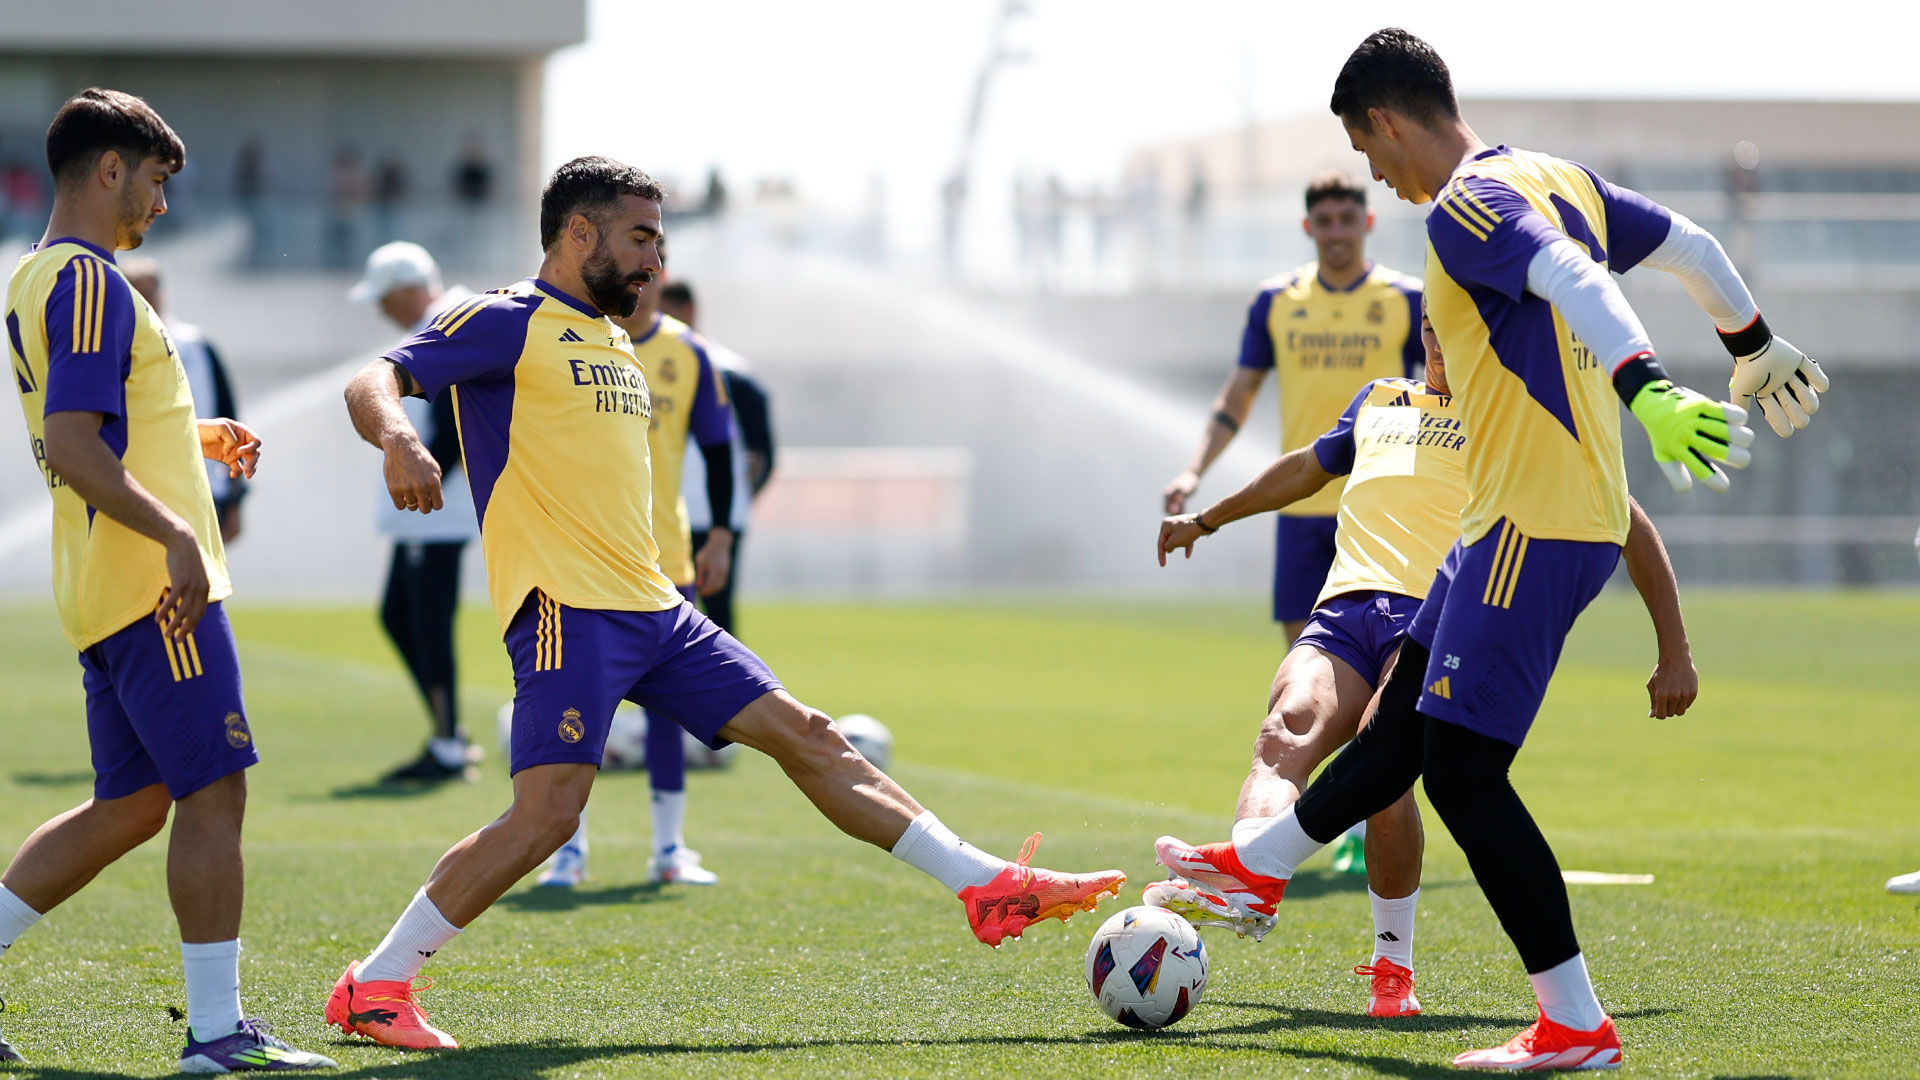 Final training session ahead of Betis clash